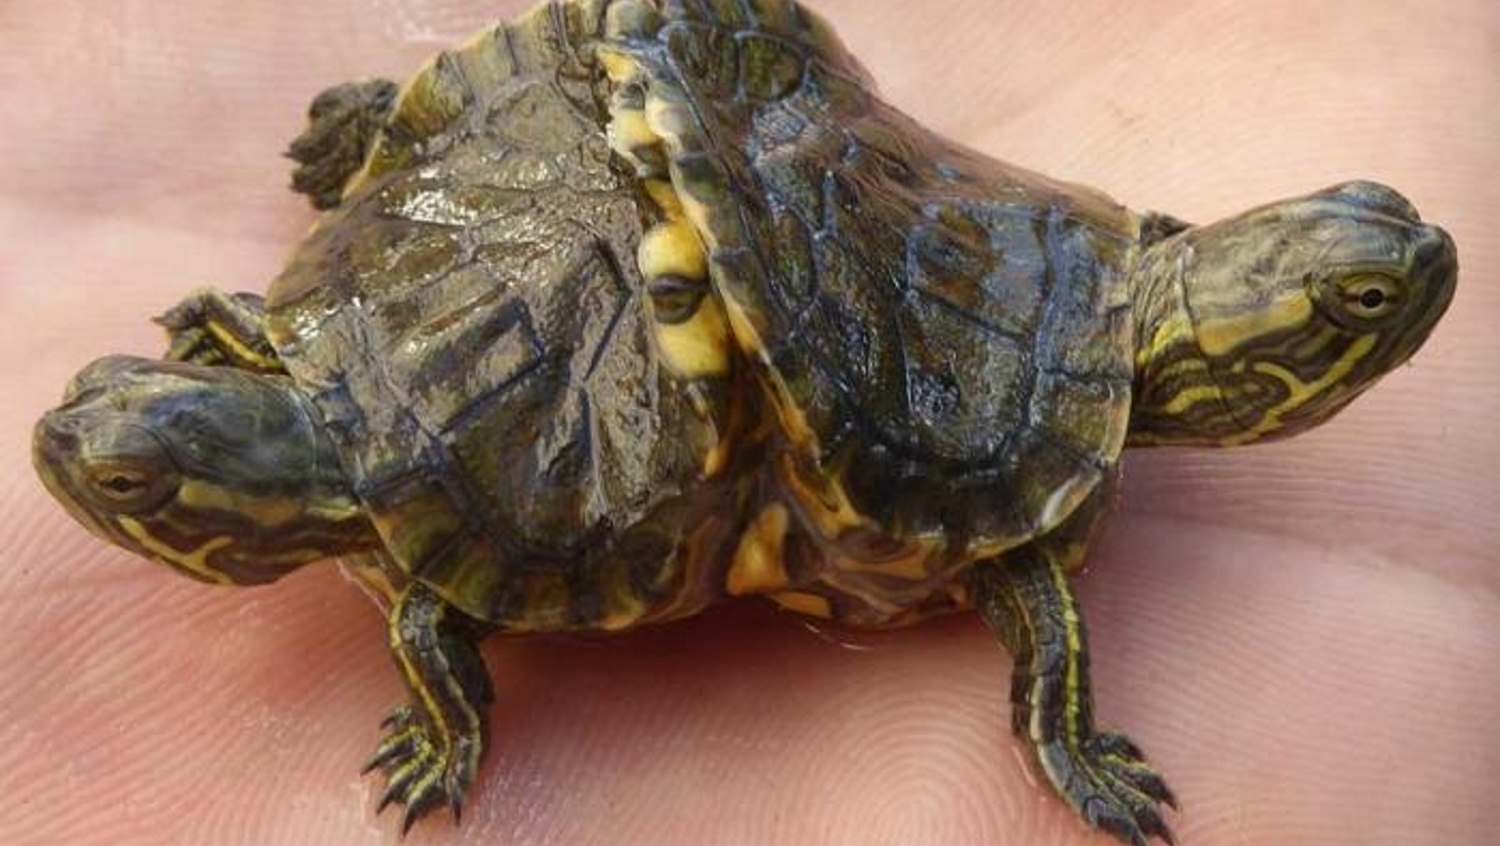 In Cuba found a live two-headed turtle - News from Havana In Cuba found a l...